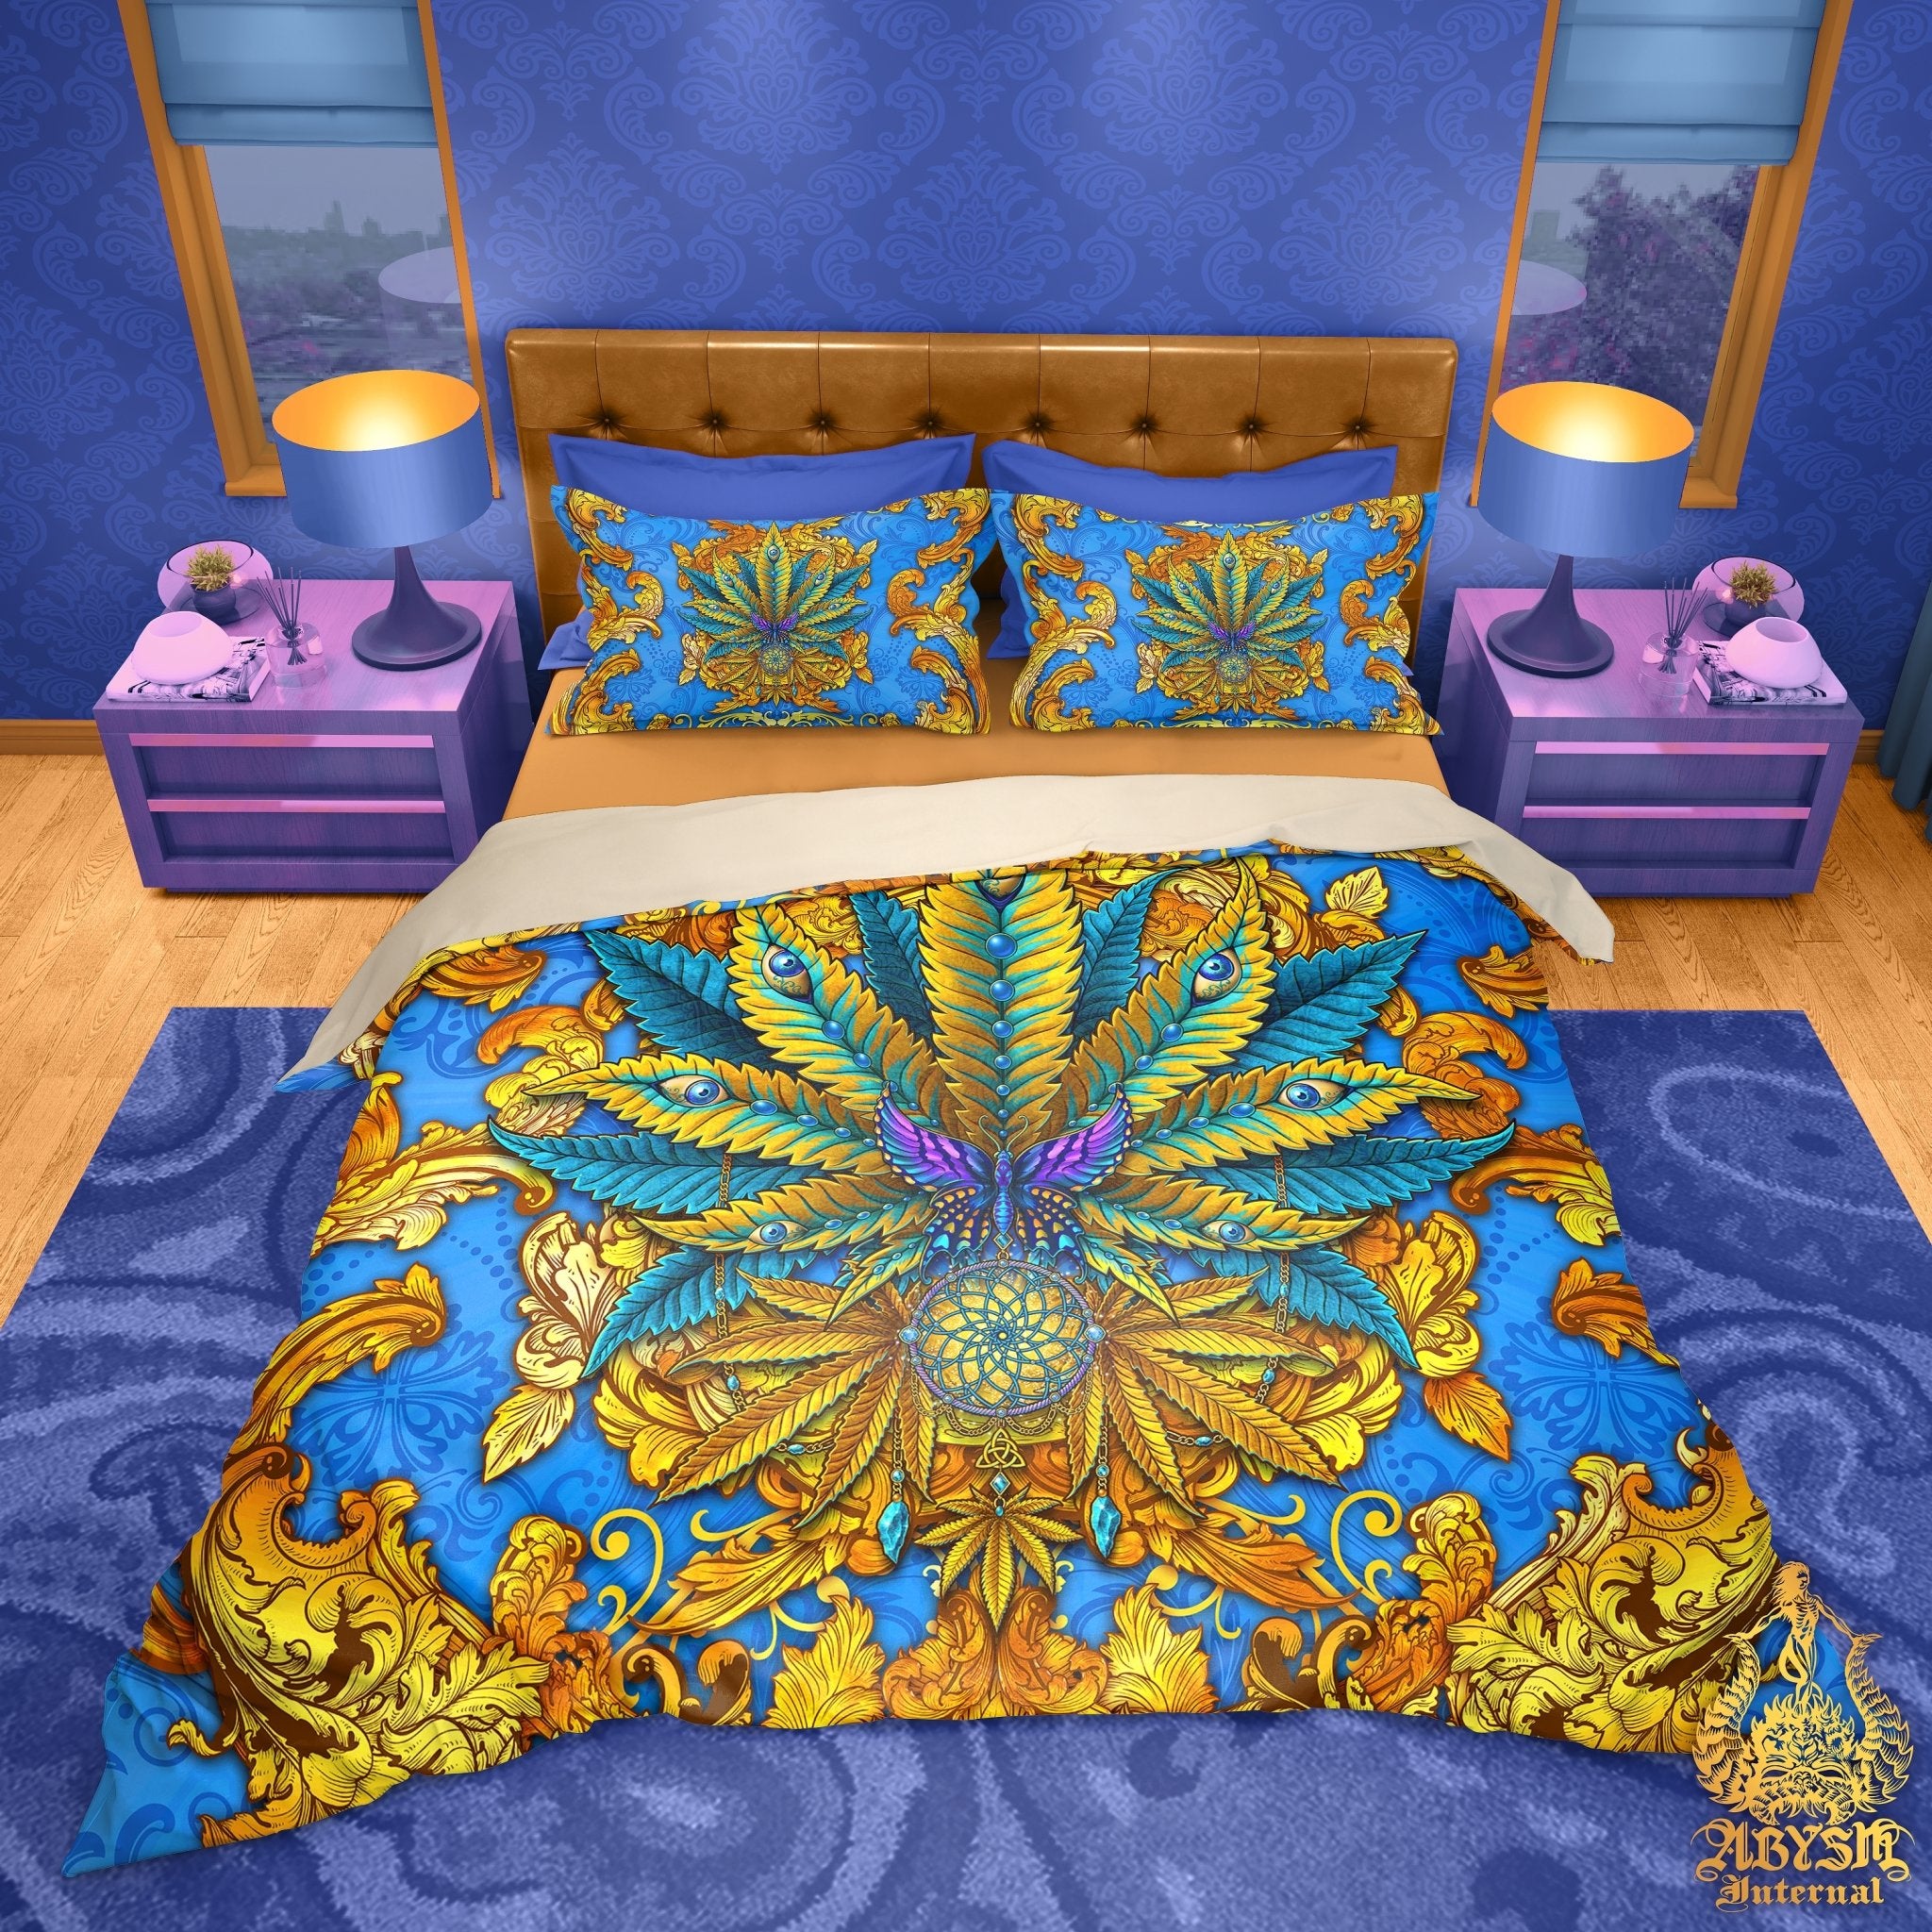 Weed Bedding Set, Comforter and Duvet, Cannabis Bed Cover, Marijuana Bedroom Decor, King, Queen and Twin Size, 420 Room Art - Cyan and Gold - Abysm Internal